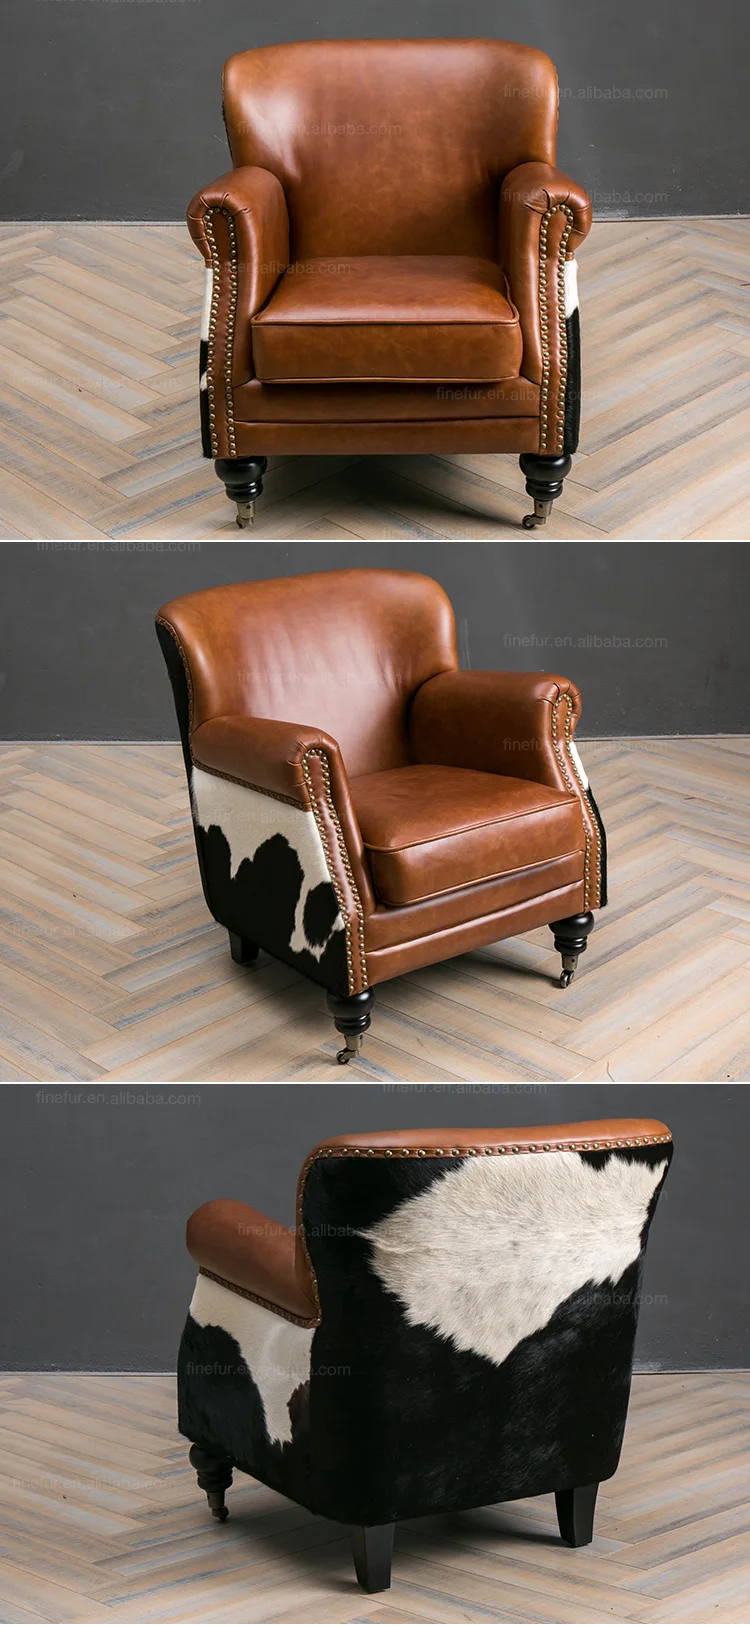 Back Cow Hide Vintage Leather Chair Wheels Chairs - Buy Furniture Chair